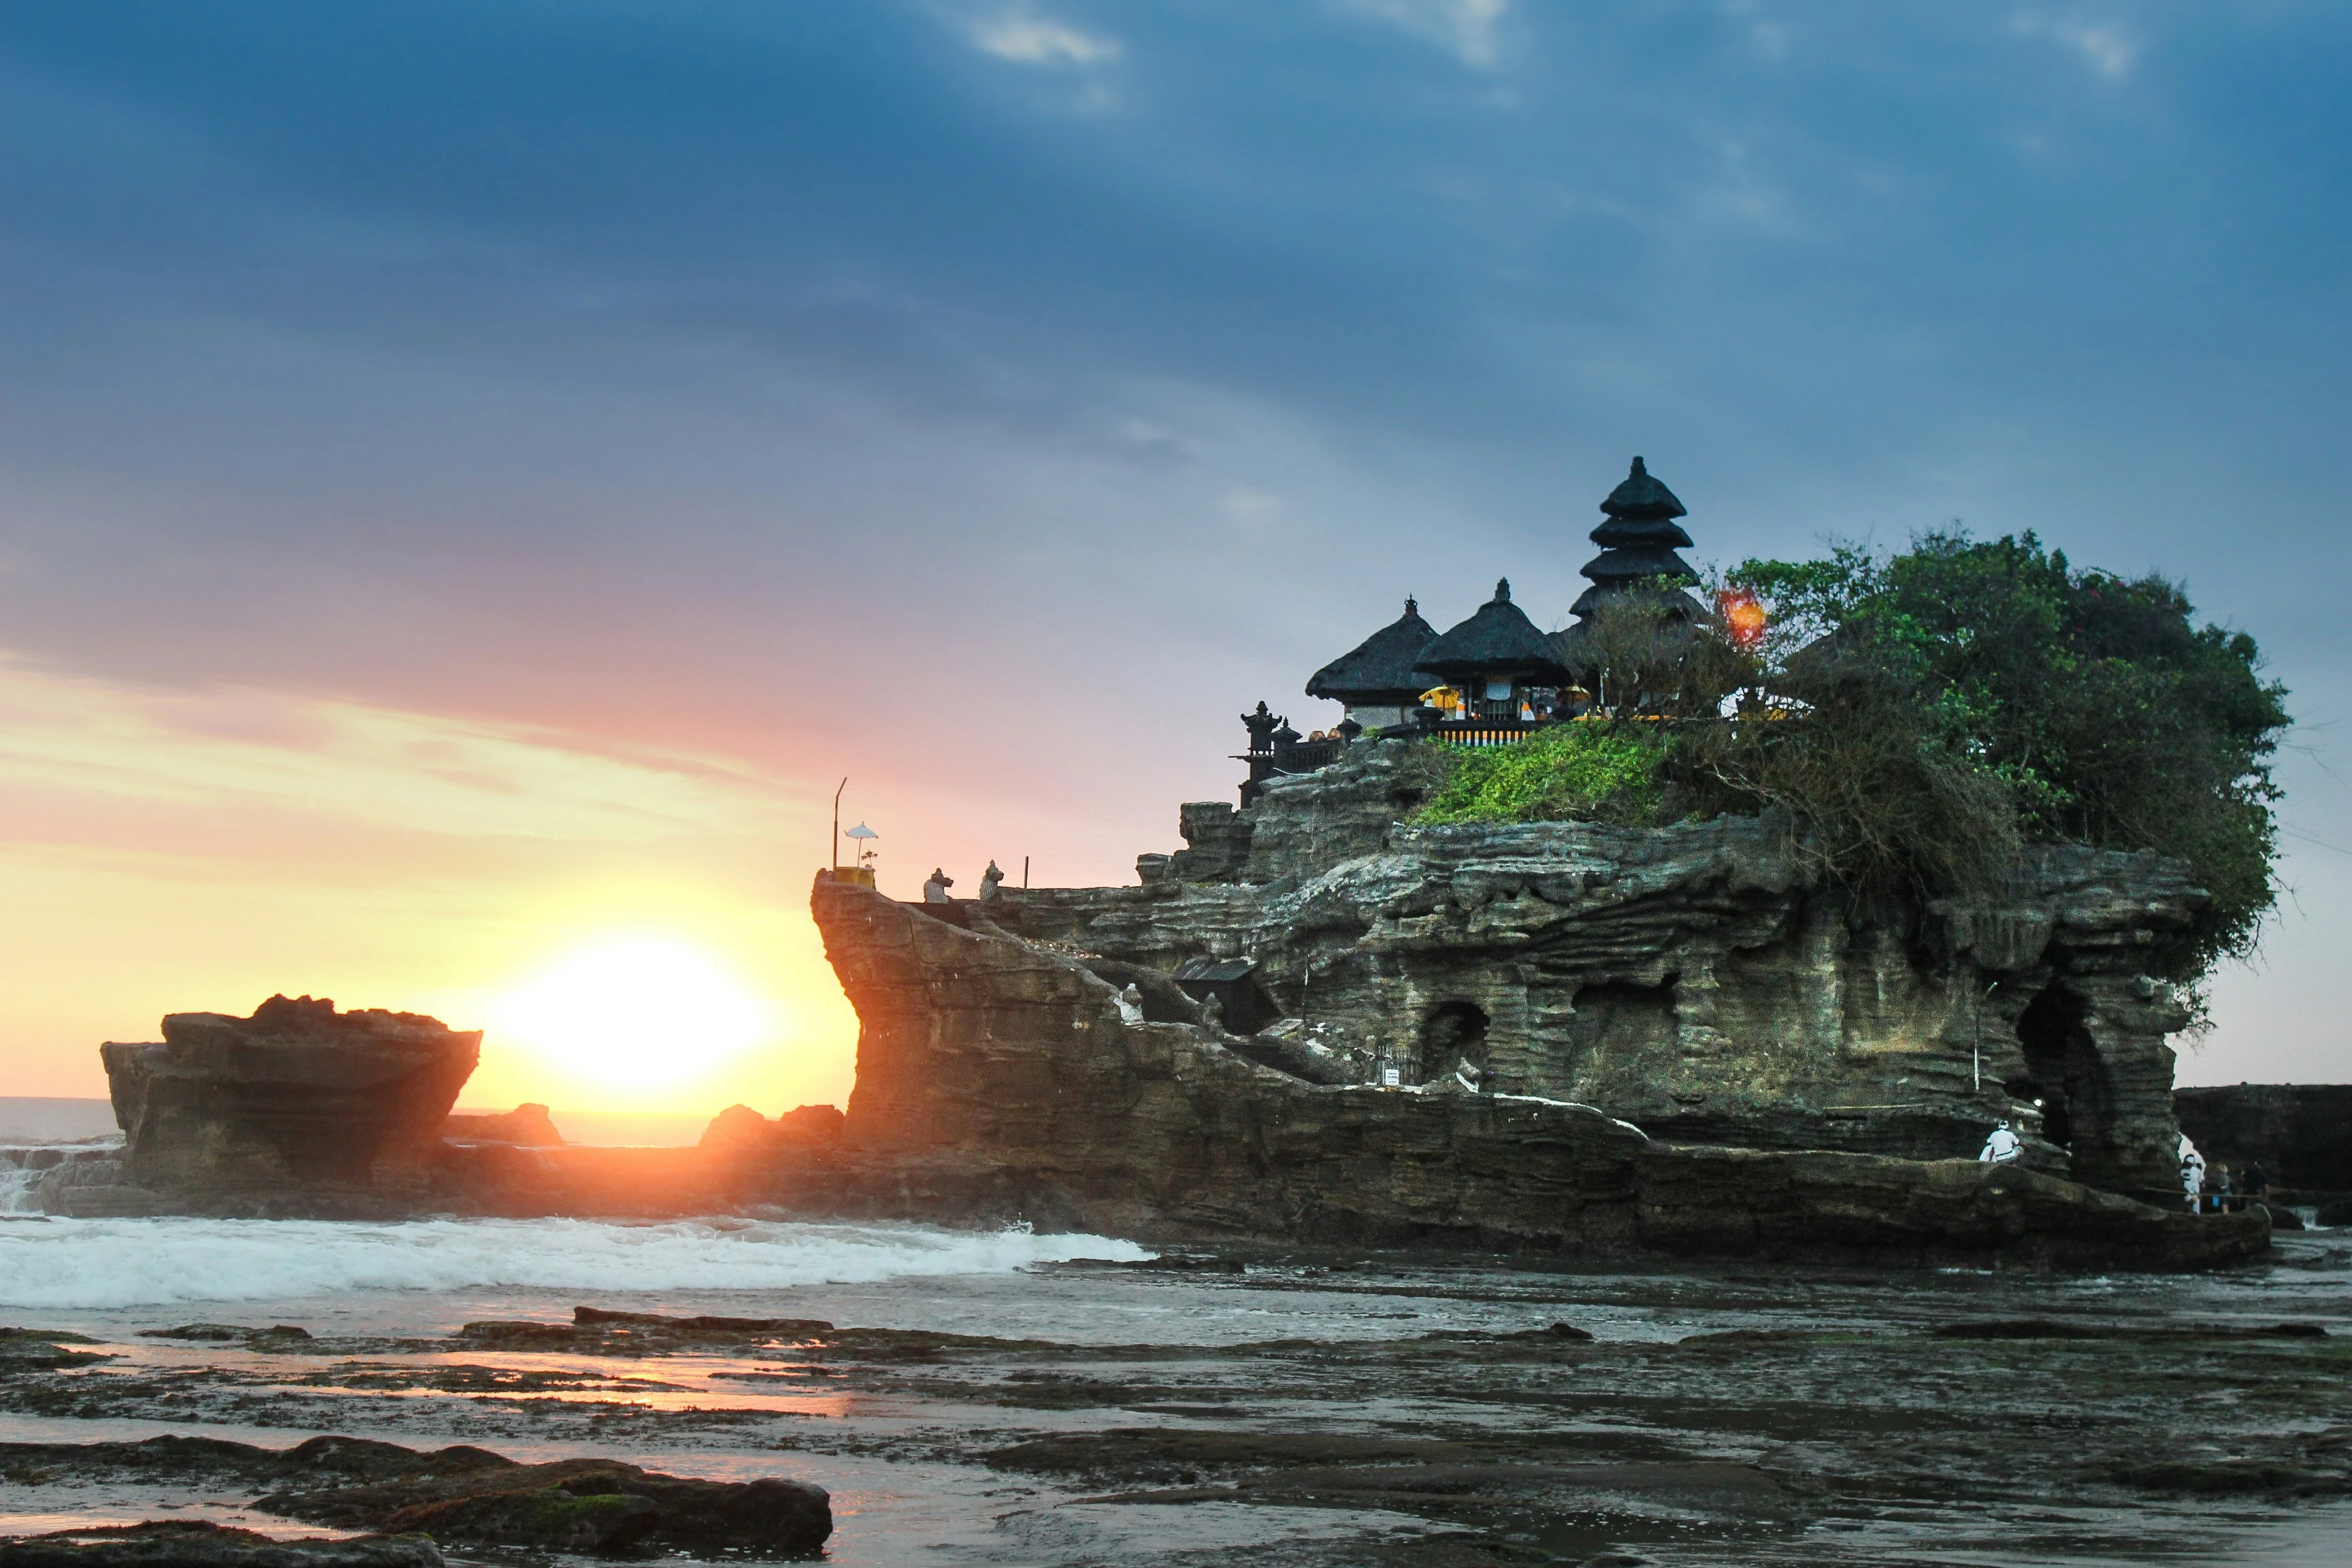 the Best Place to Stay in Bali